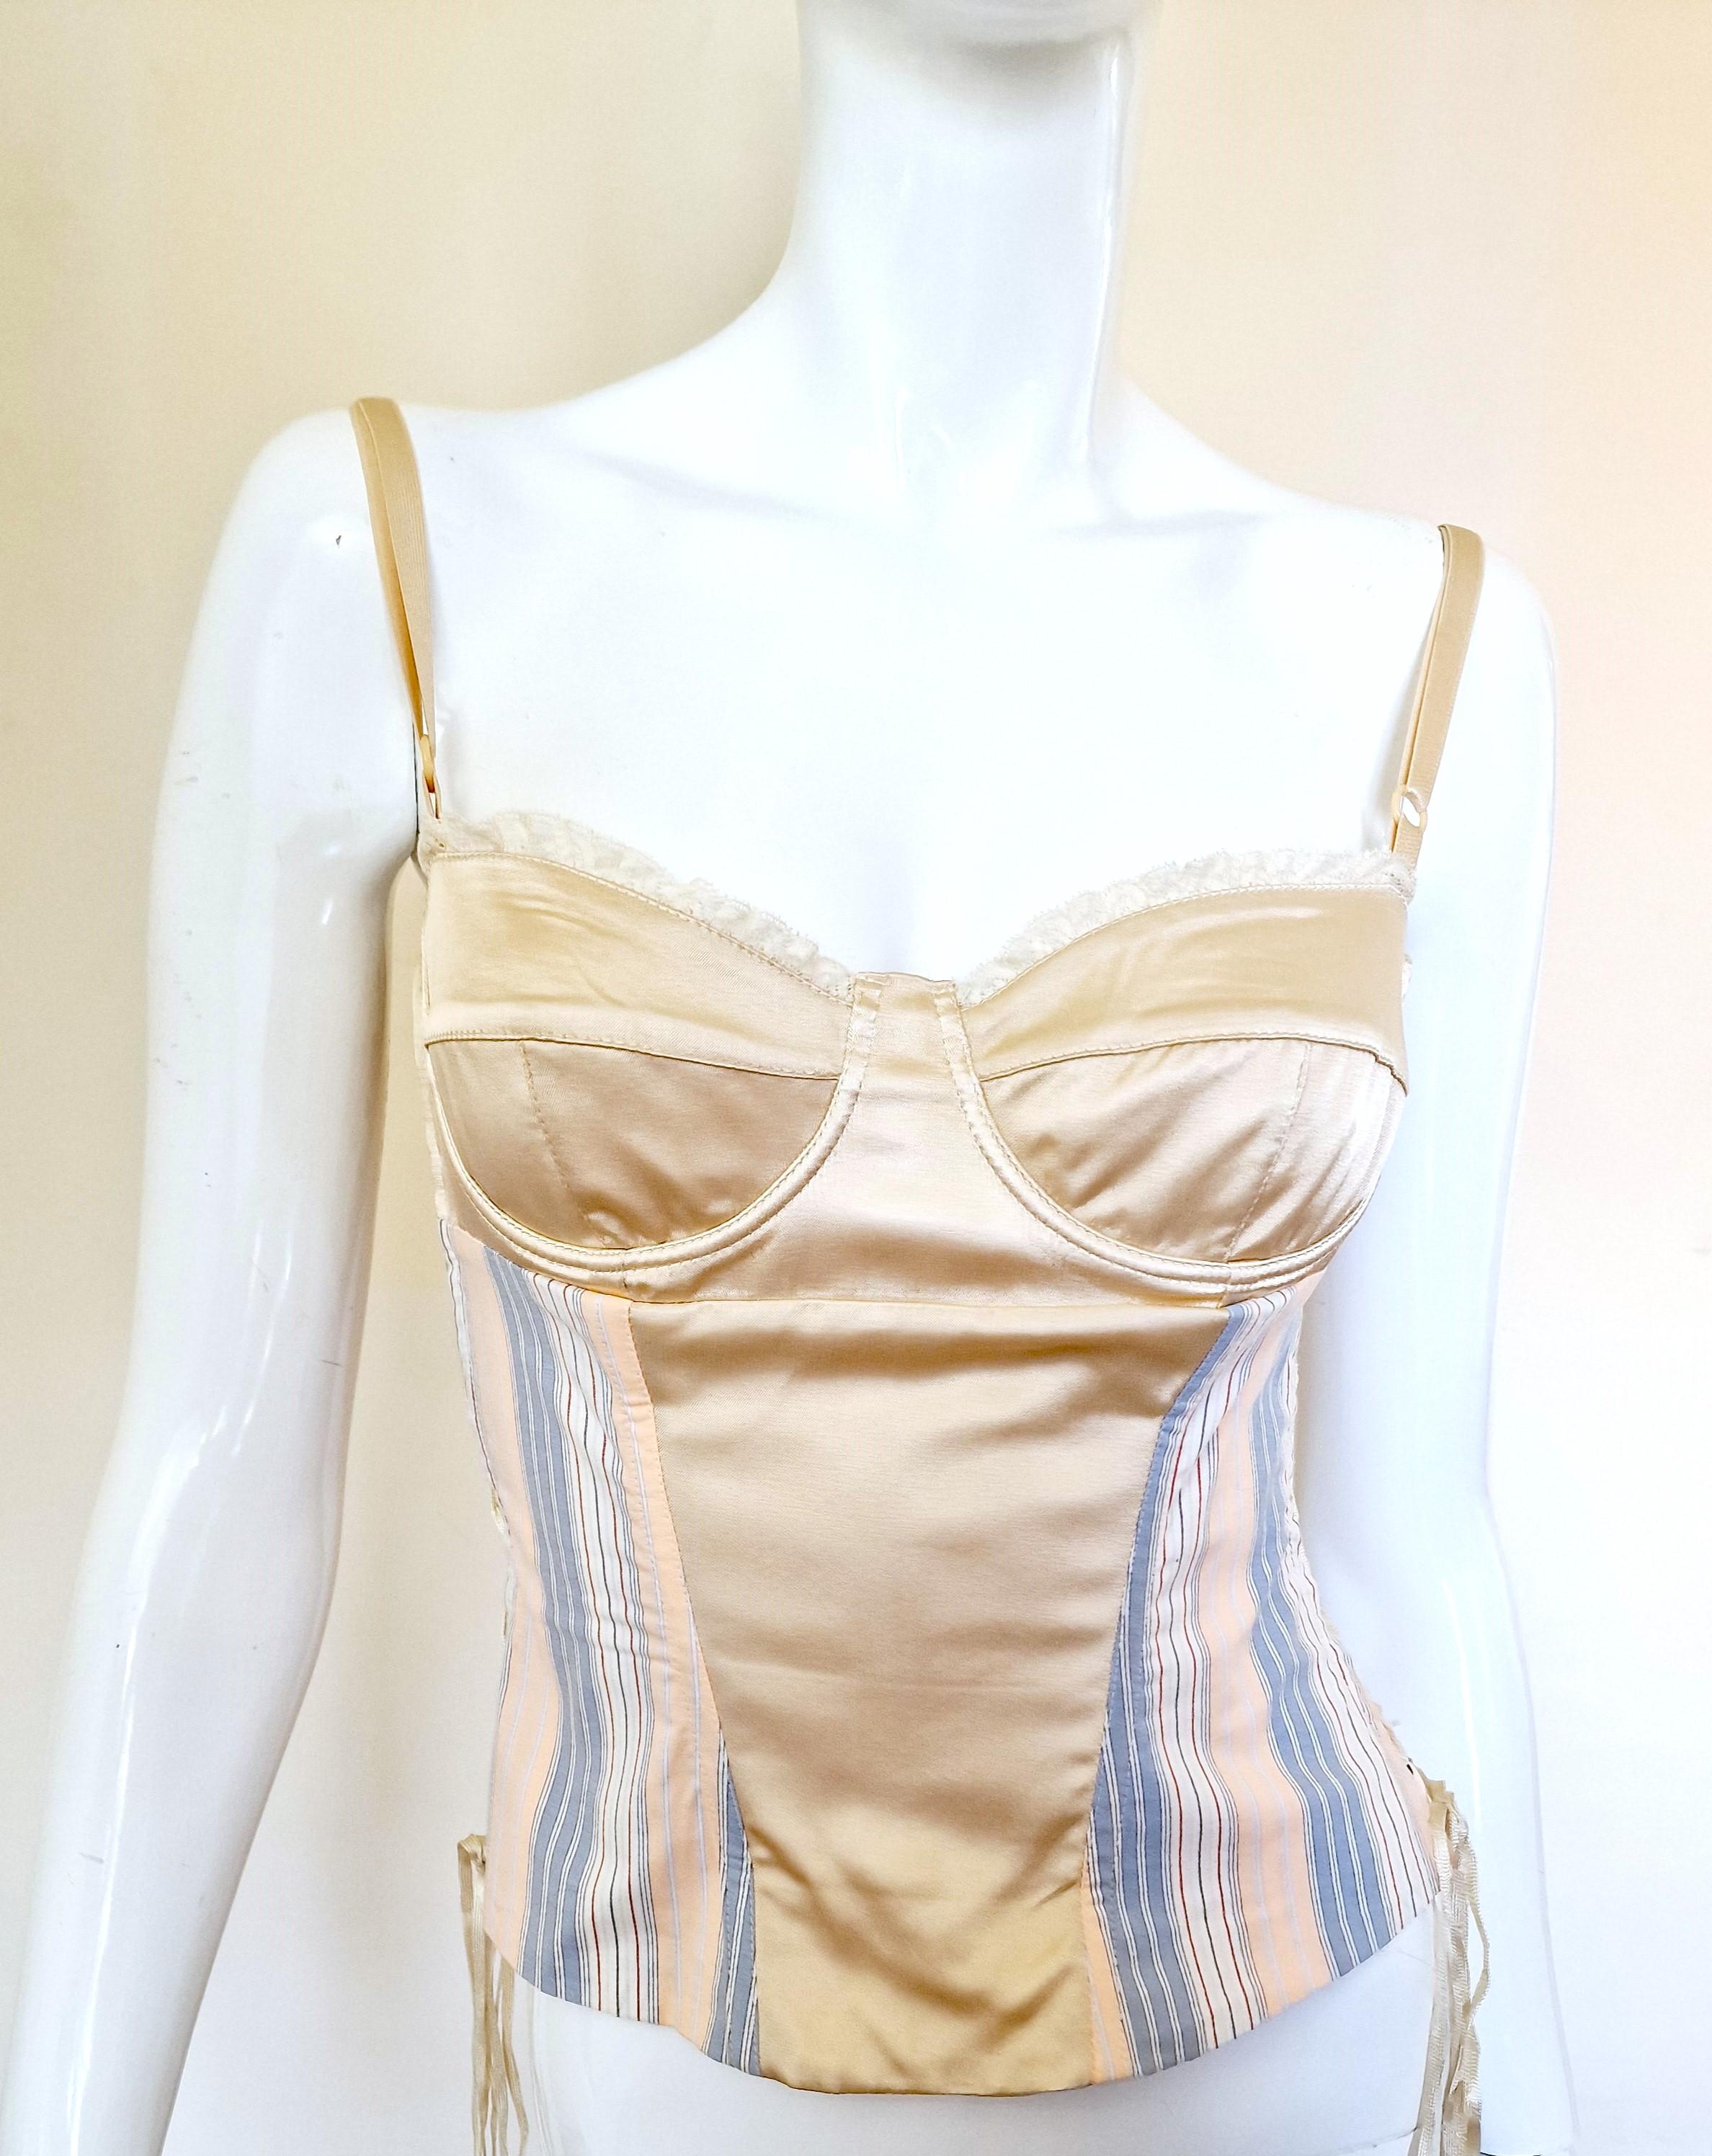 
Dolce and Gabbana corset from the 90s!

EXCELLENT condition!

SIZE
Medium.
Marked size: Italain 28/42.
Length (front): 45 cm / 17.7 inch
Length (back): 42 cm / 16.5 inch
Bust: 37 cm / 14.6 inch
Waist: 34 cm / 13.4 inch

Made in Italy!